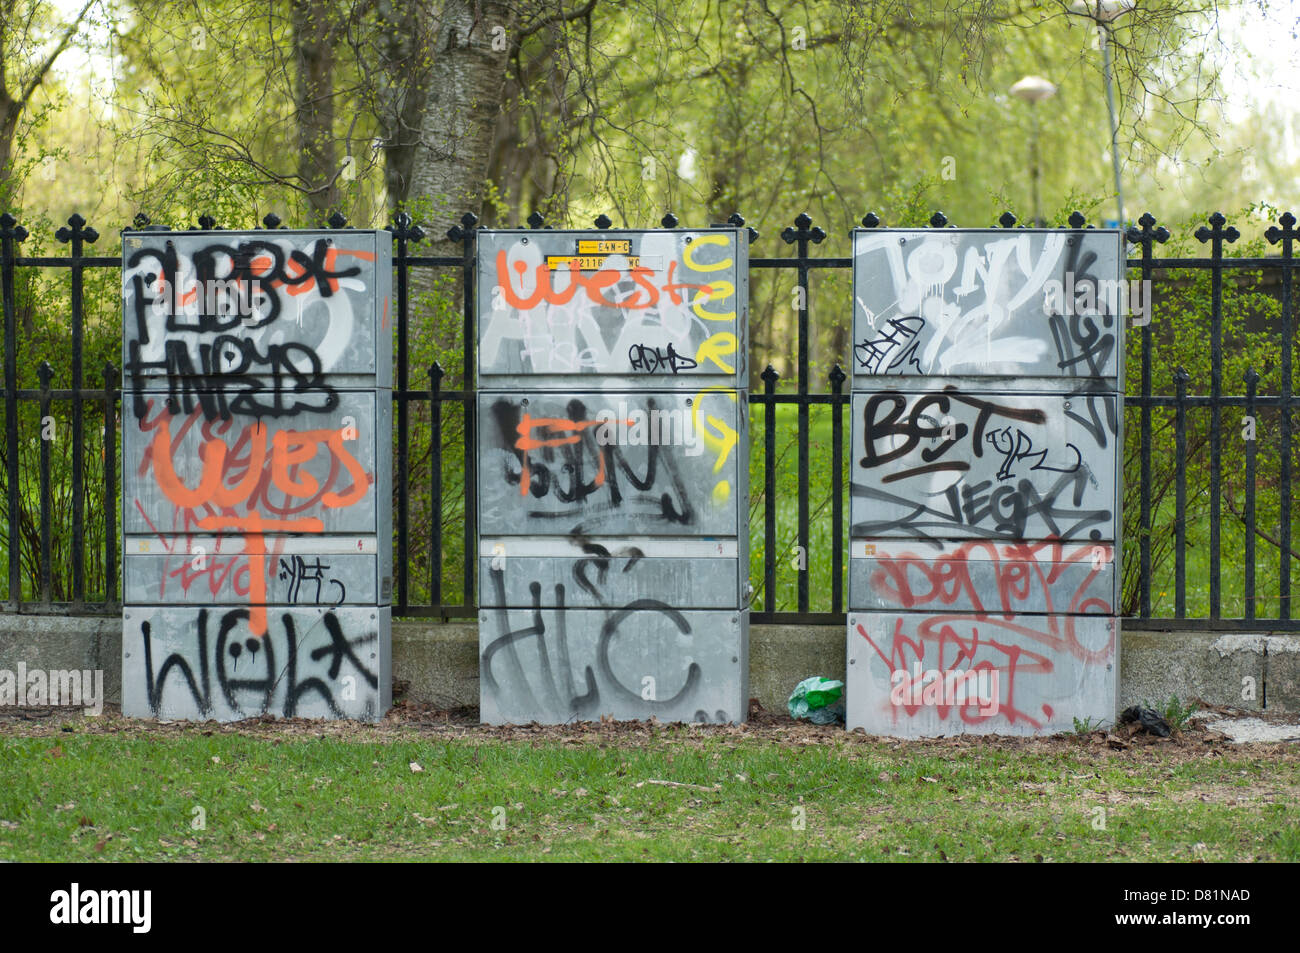 Massive graffiti on three electrical enclosures in a park Stock Photo